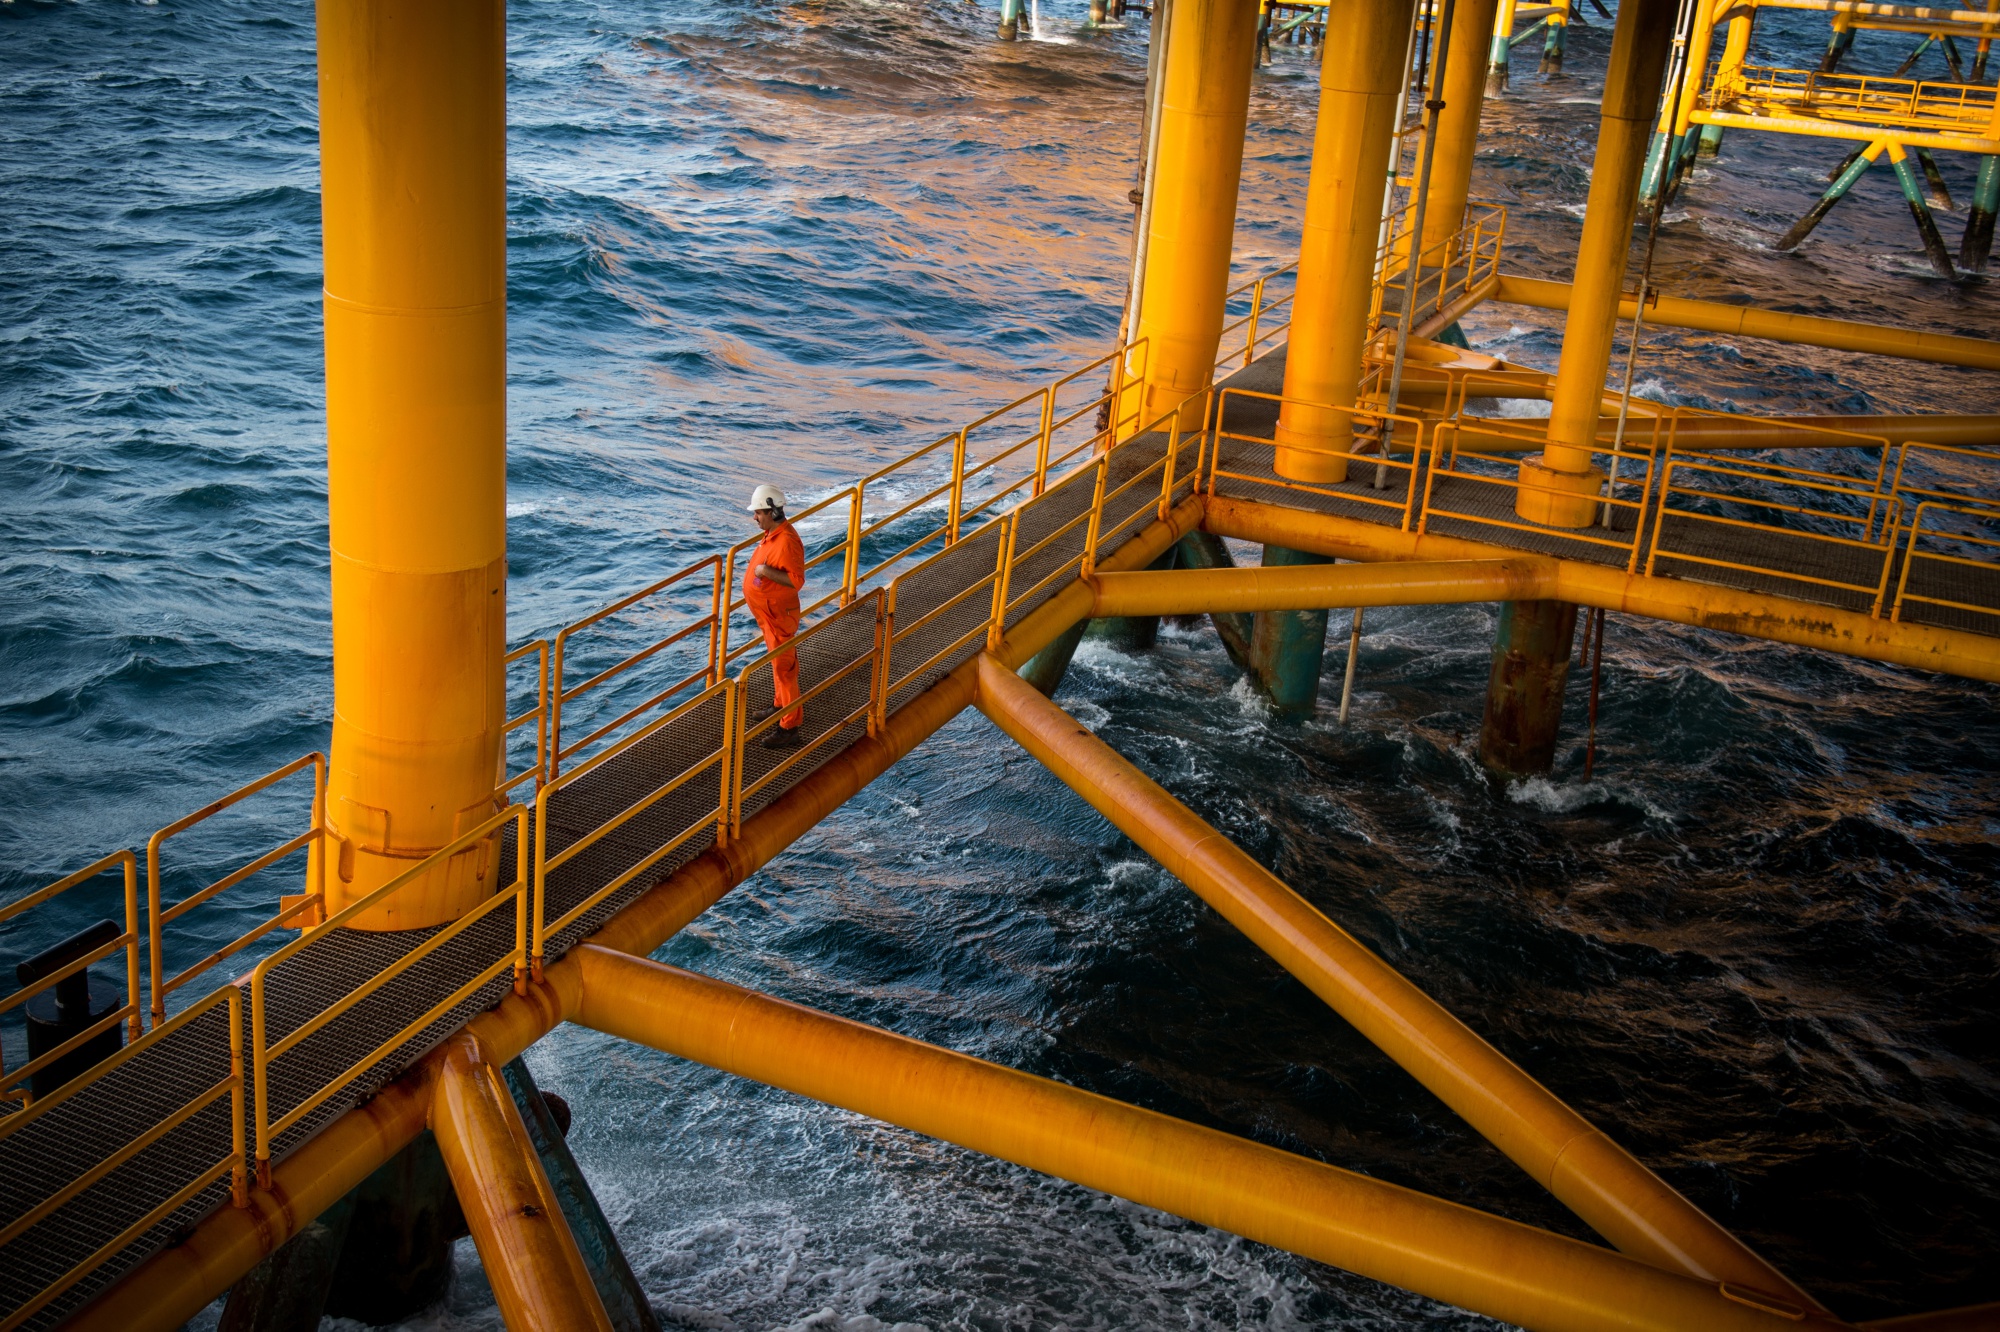 A worker looks out to sea from a low walkway aboard an offshore oil platform in the Persian Gulf's Salman Oil Field, operated by the National Iranian Offshore Oil Co., near Lavan island, Iran. Photographer: Ali Mohammadi/Bloomberg